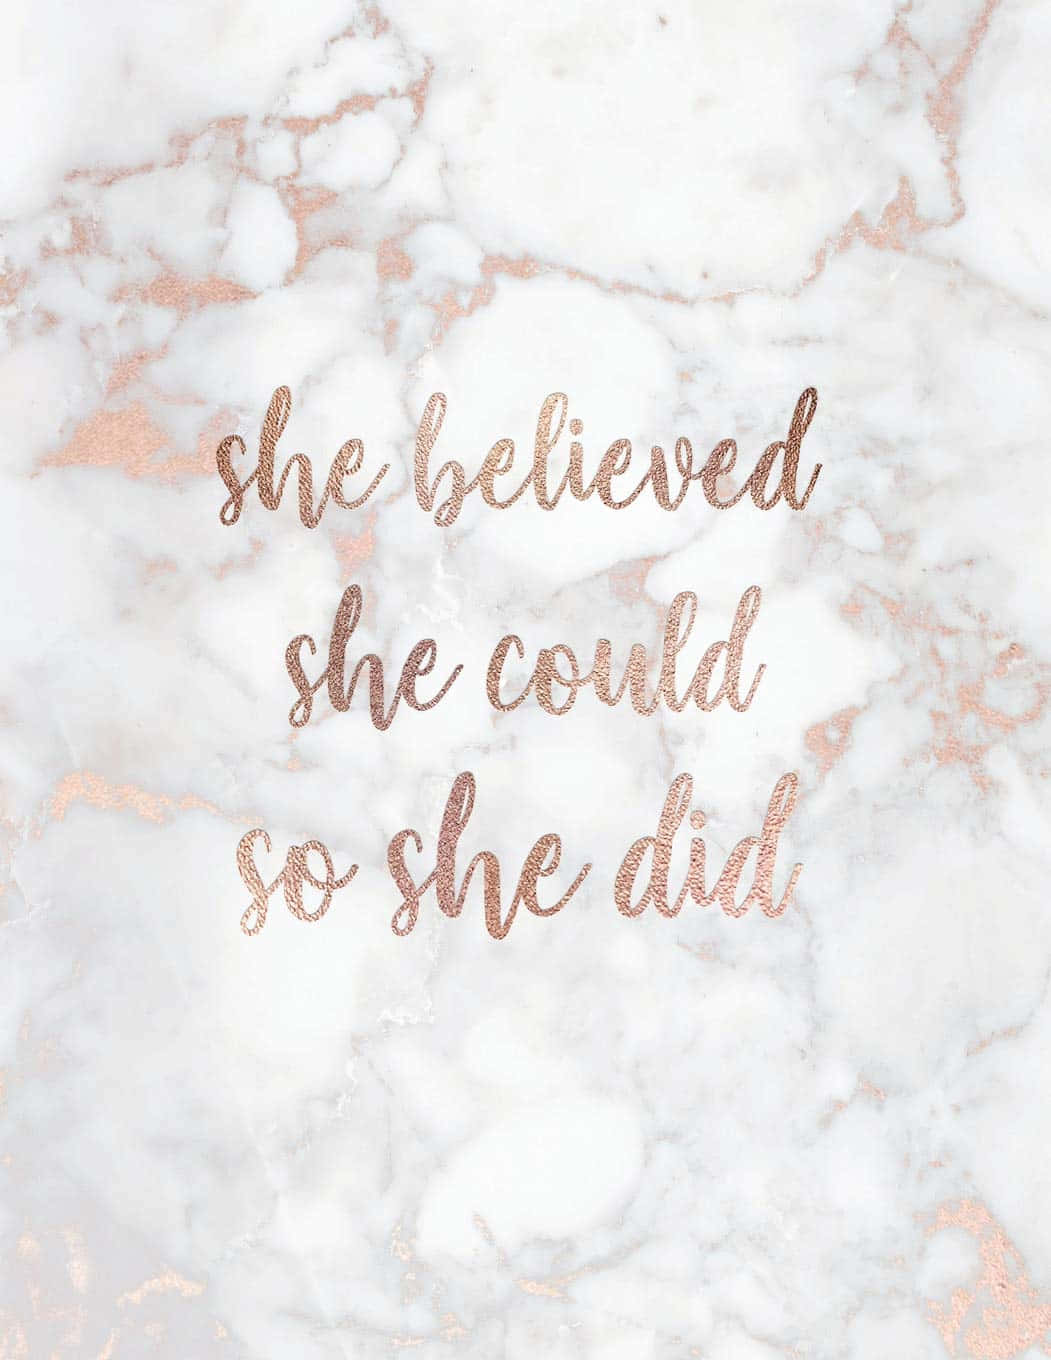 She Believed She Could, and She Did! Wallpaper